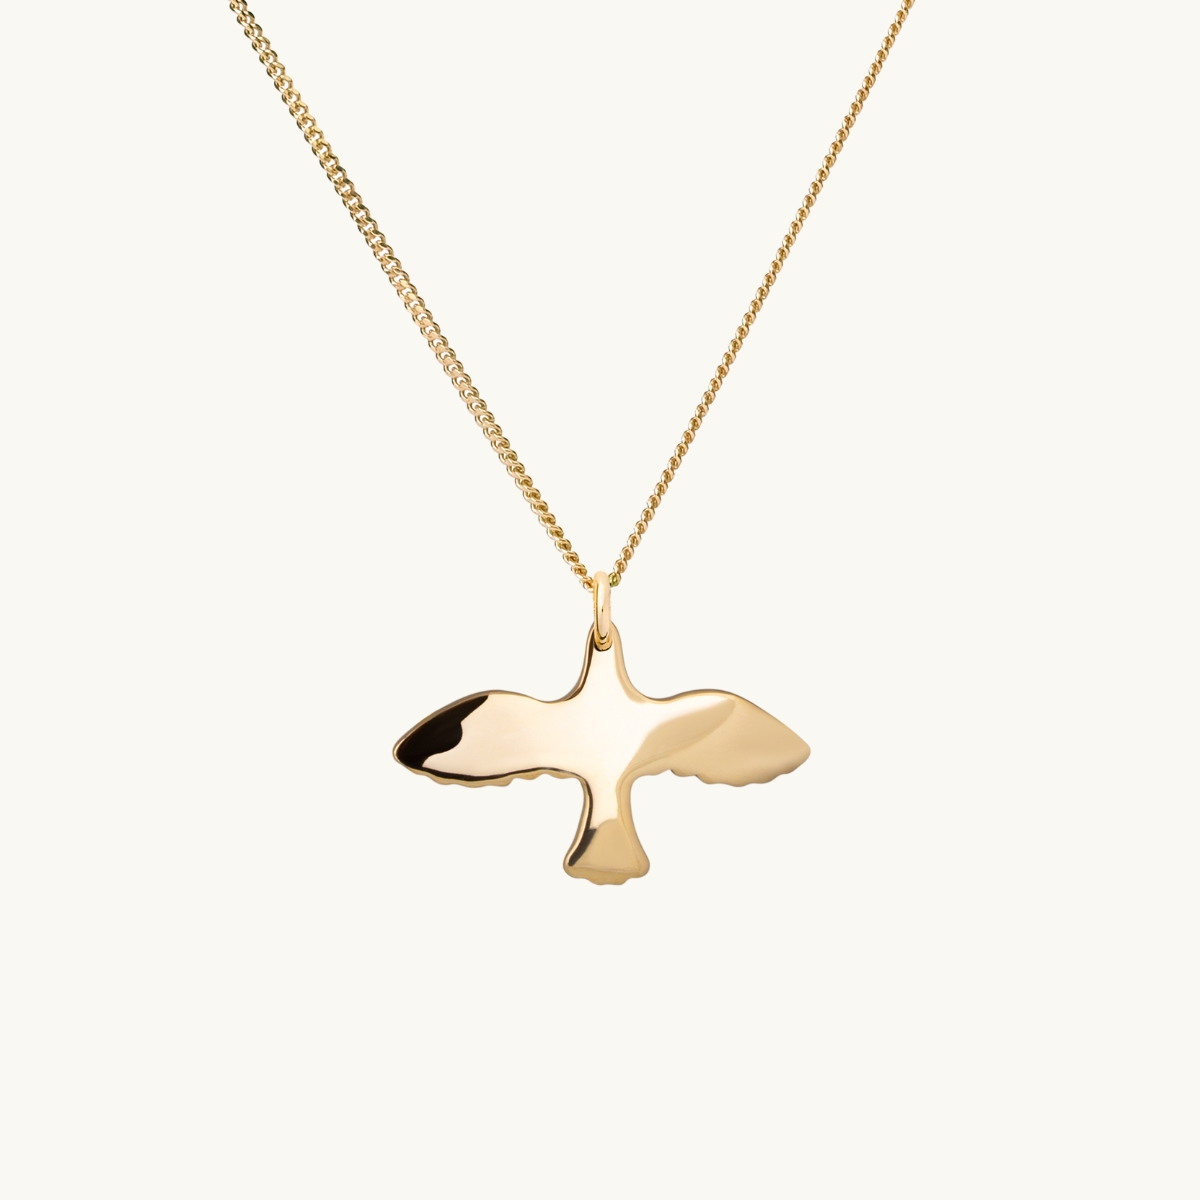 18K GOLD DOVE NECKLACE - 45 CM in the group SHOP / FINE JEWELRY at EMMA ISRAELSSON (neck044-45)